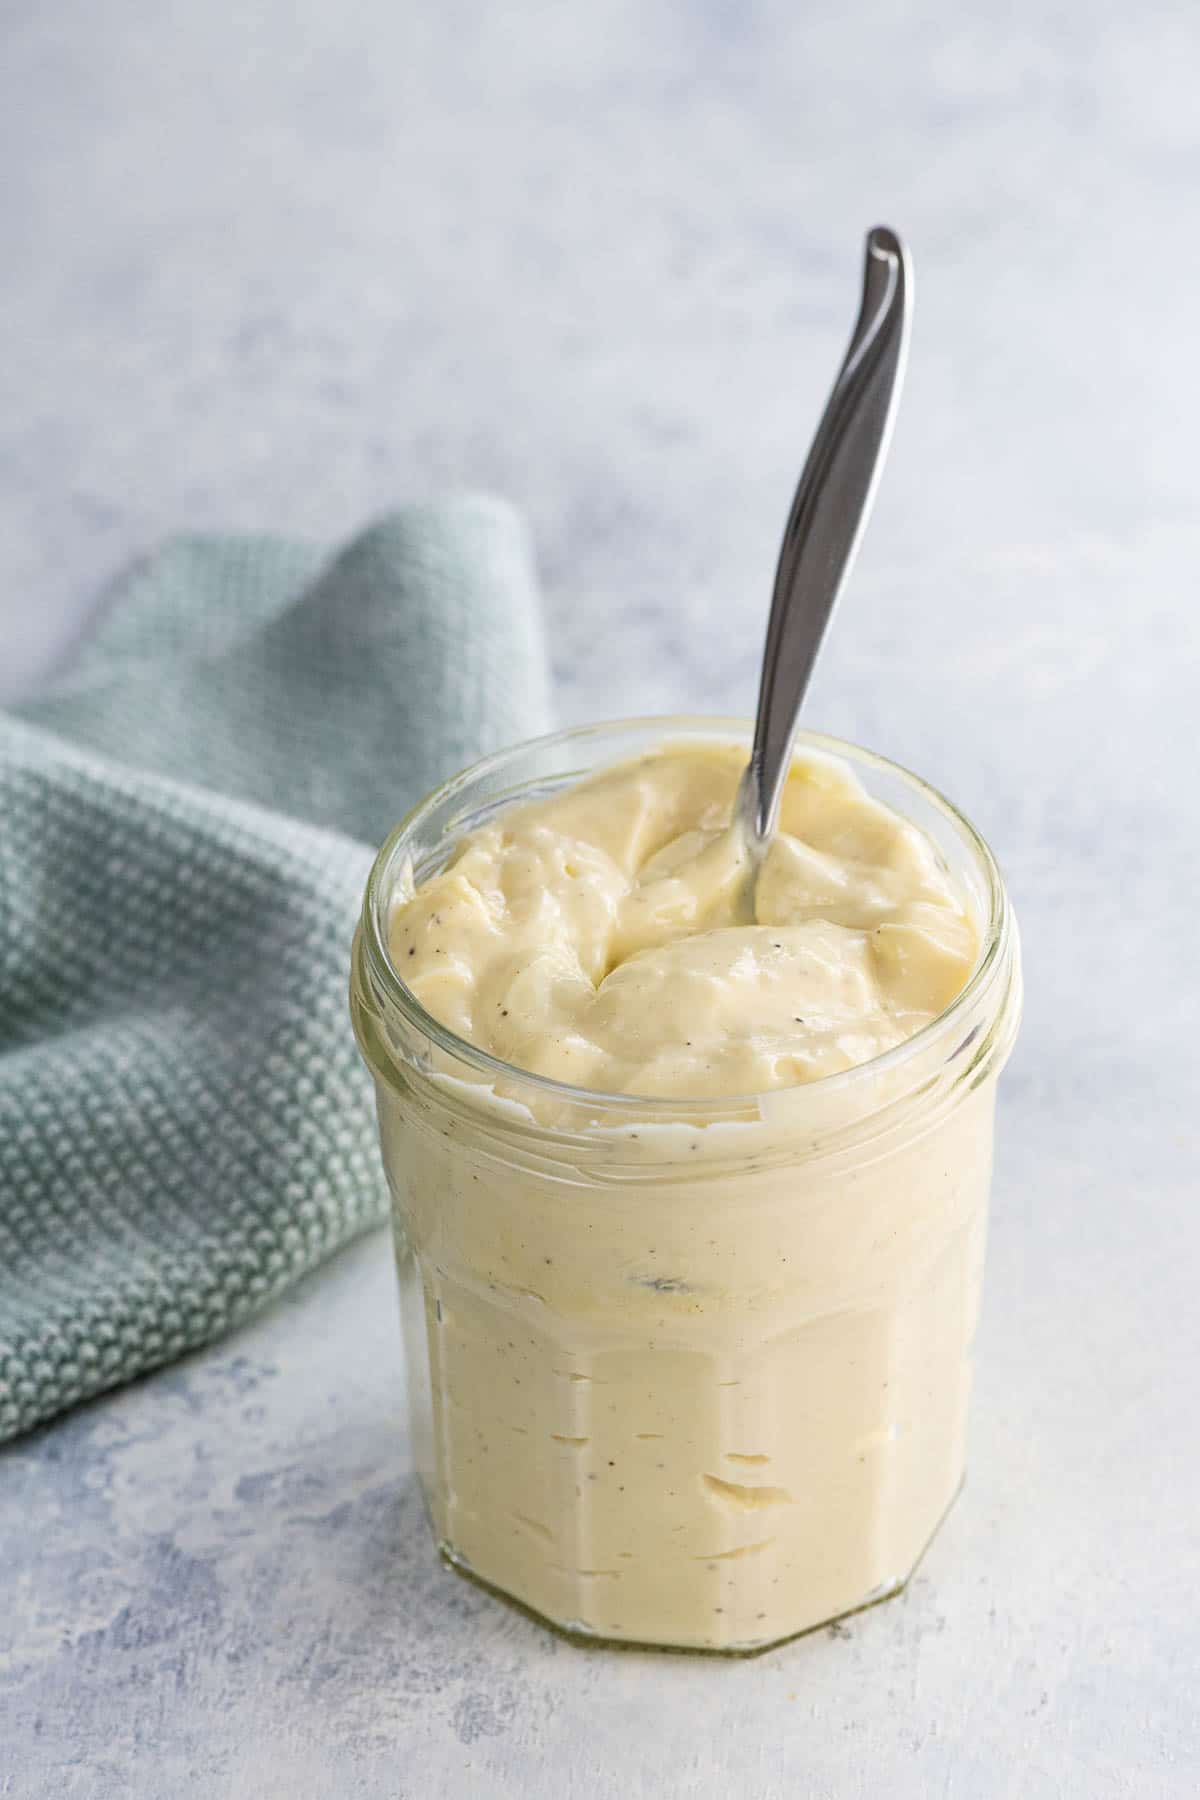 immersion blender mayo in a jar with a spoon and a napkin